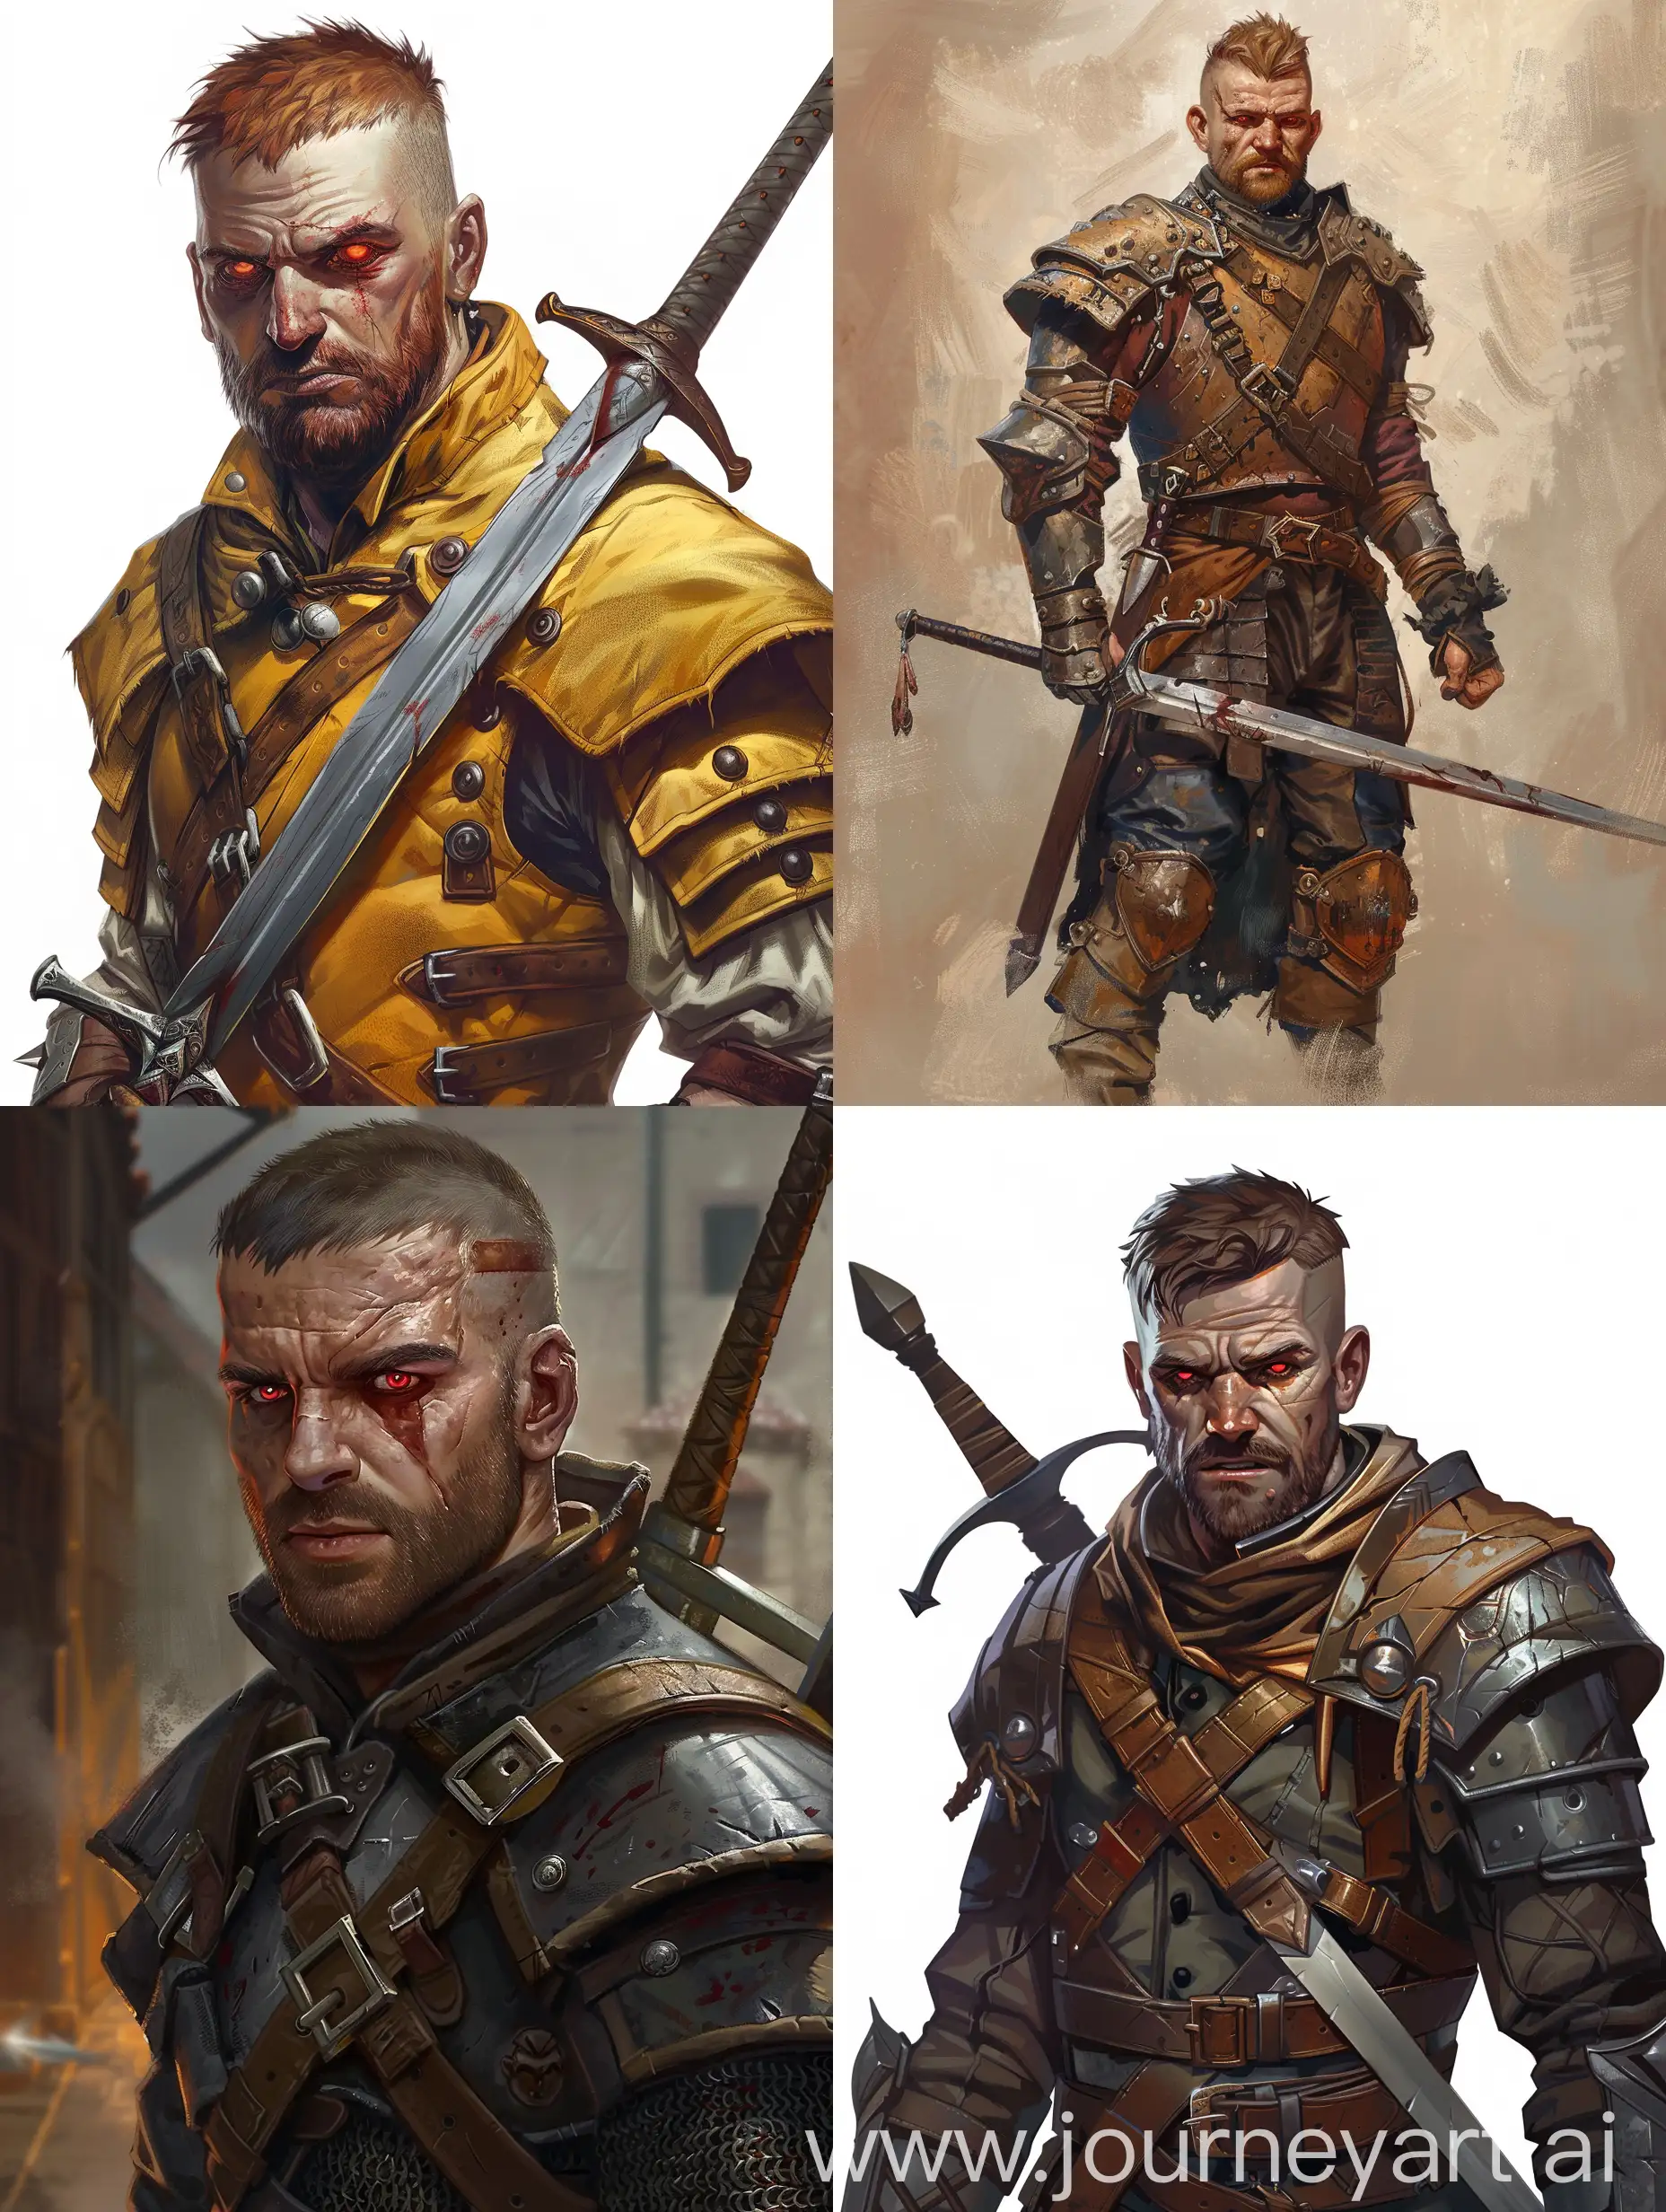 Mysterious-Mercenary-Warrior-with-Crossbow-and-Throwing-Knives